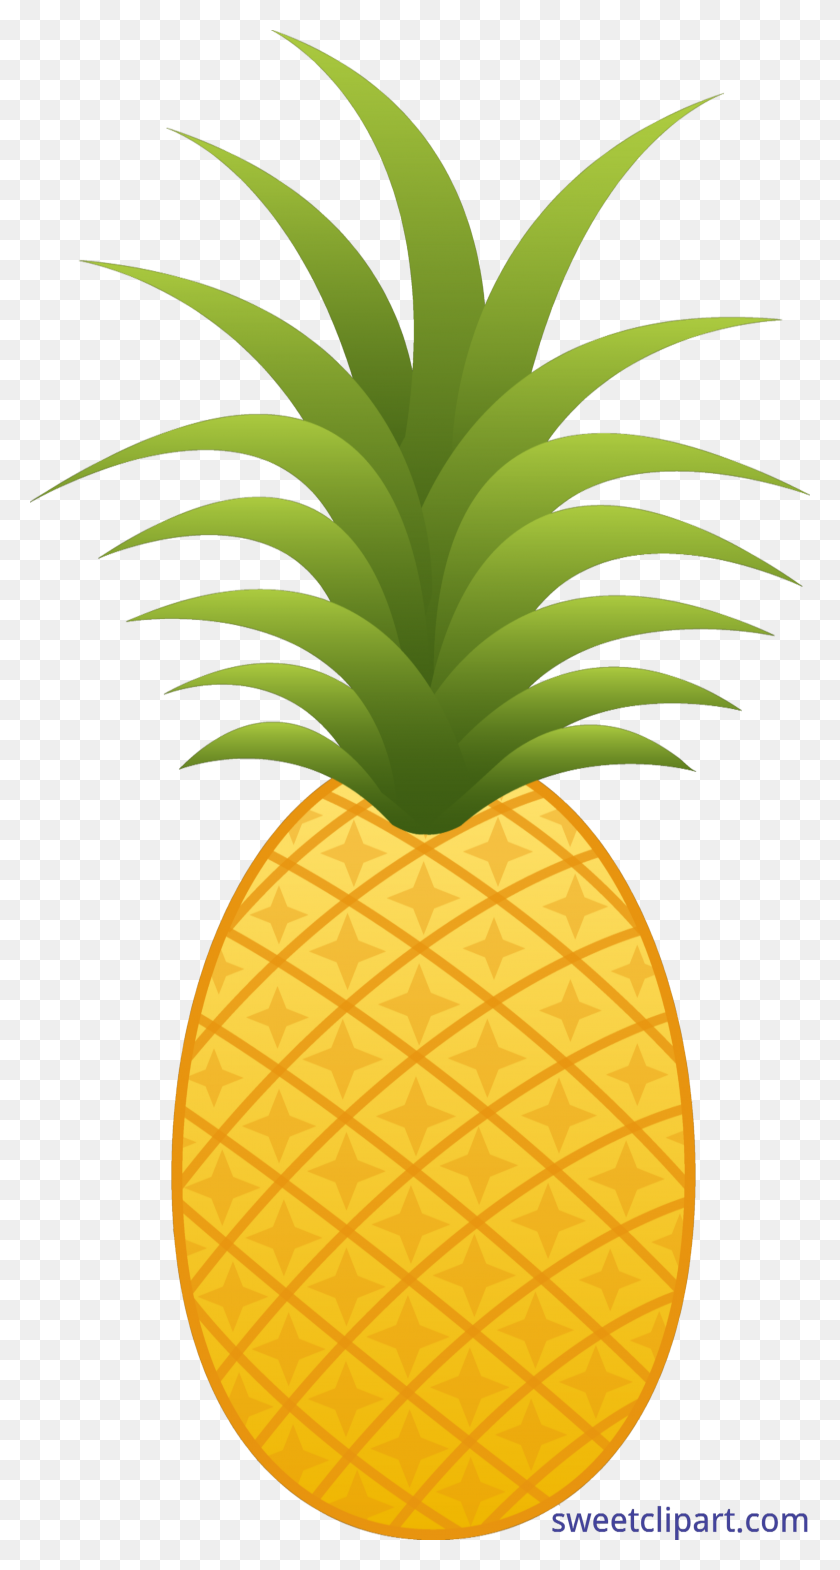 3062x5931 Pineapple Clip Art - Pineapple With Sunglasses Clipart